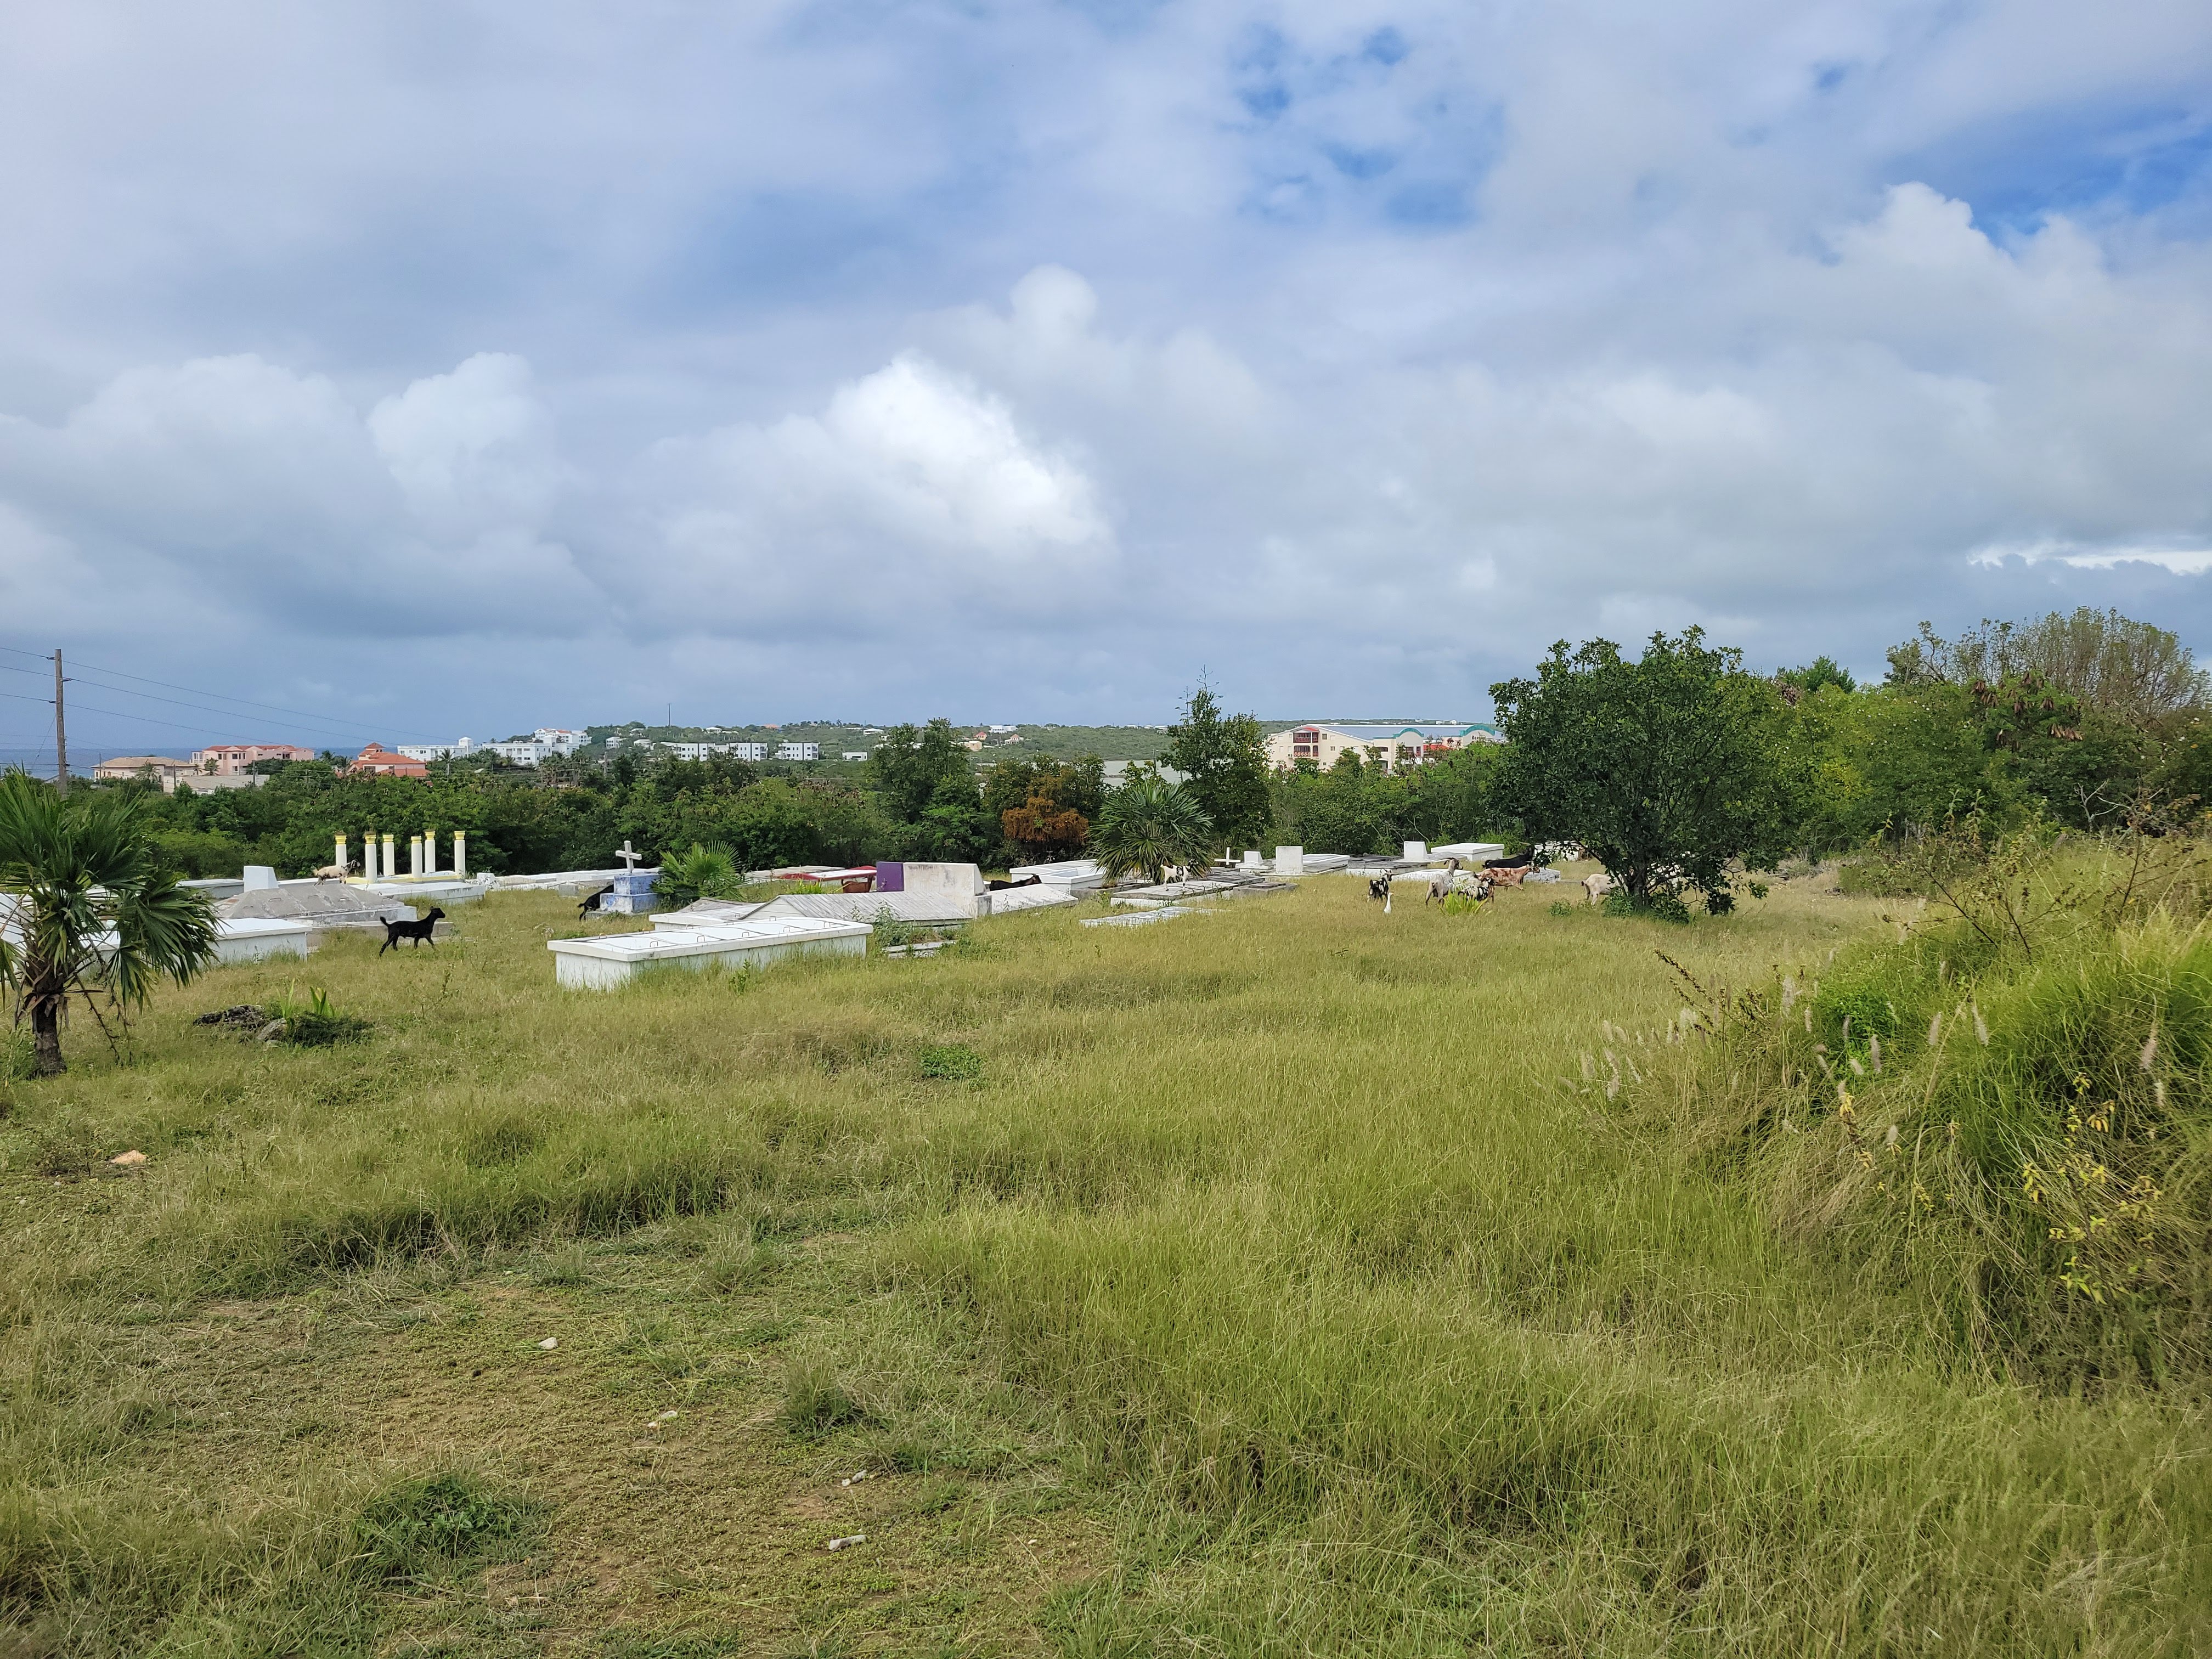 Goats In Anguilla Cemetery